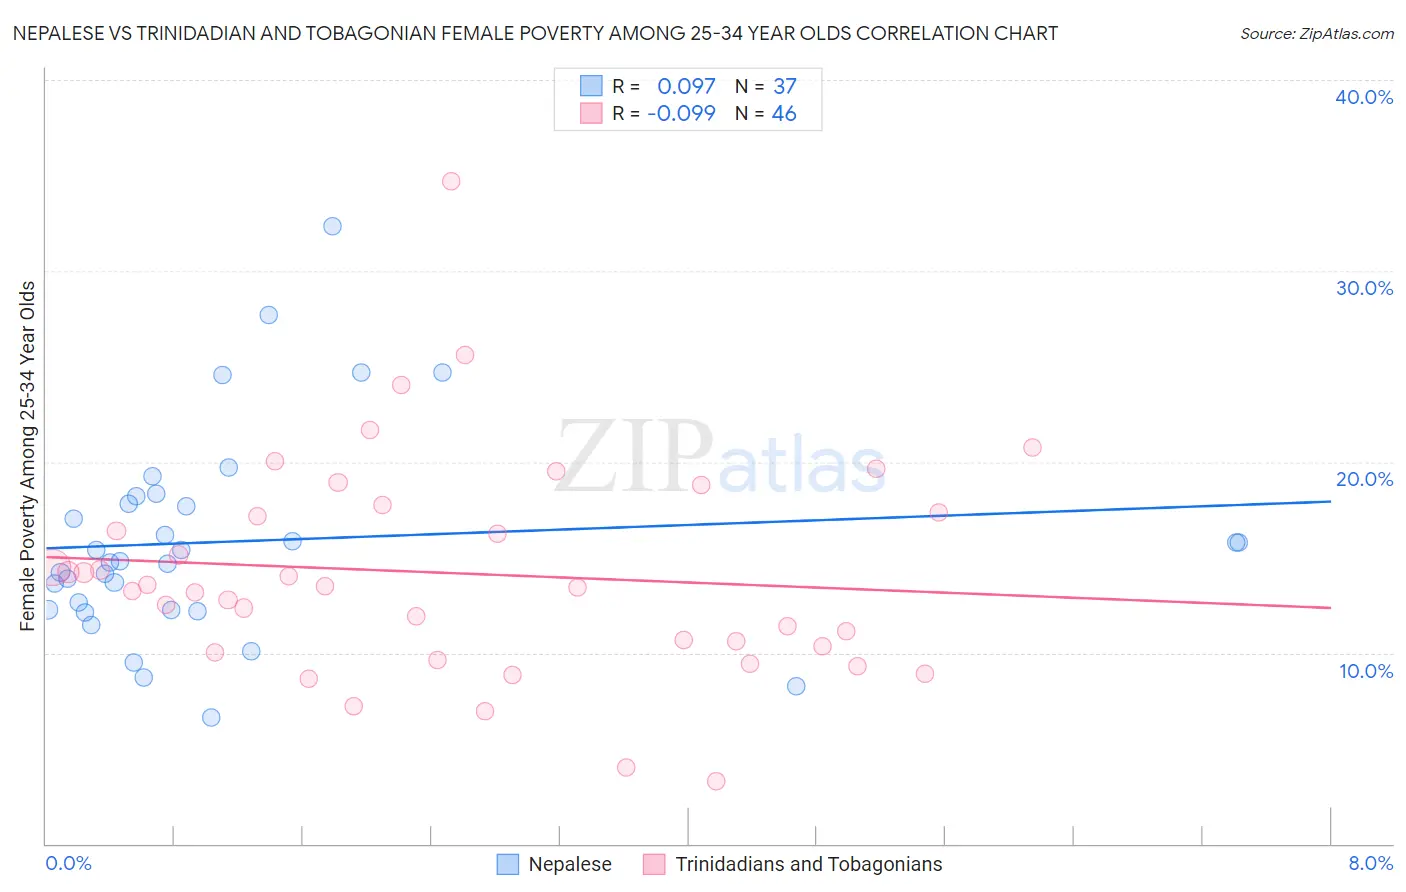 Nepalese vs Trinidadian and Tobagonian Female Poverty Among 25-34 Year Olds